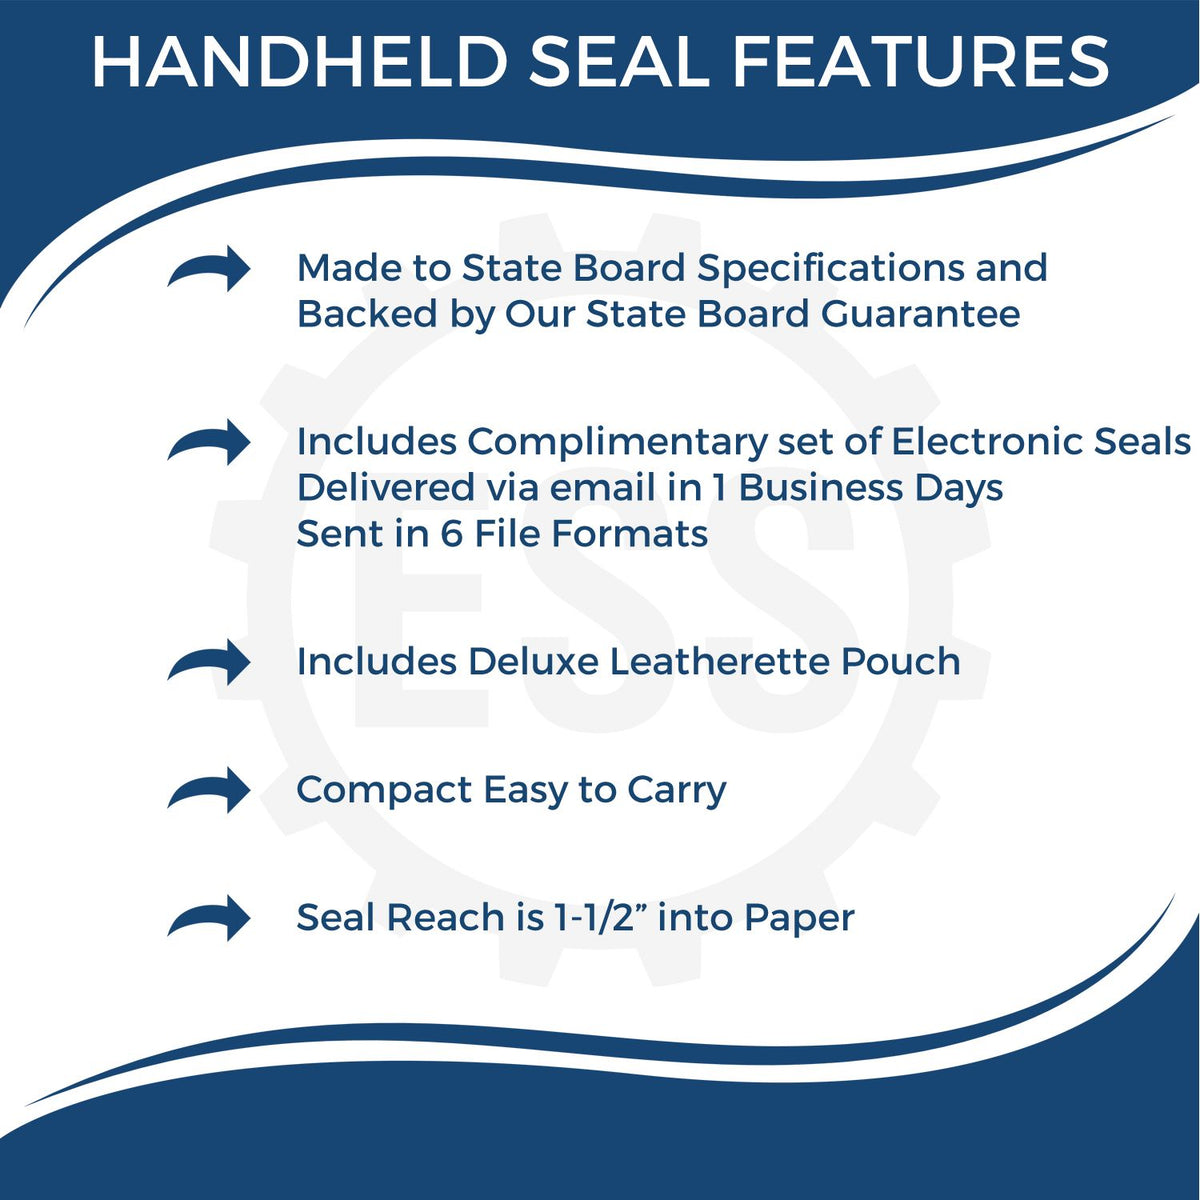 A picture of an infographic highlighting the selling points for the Handheld Louisiana Land Surveyor Seal